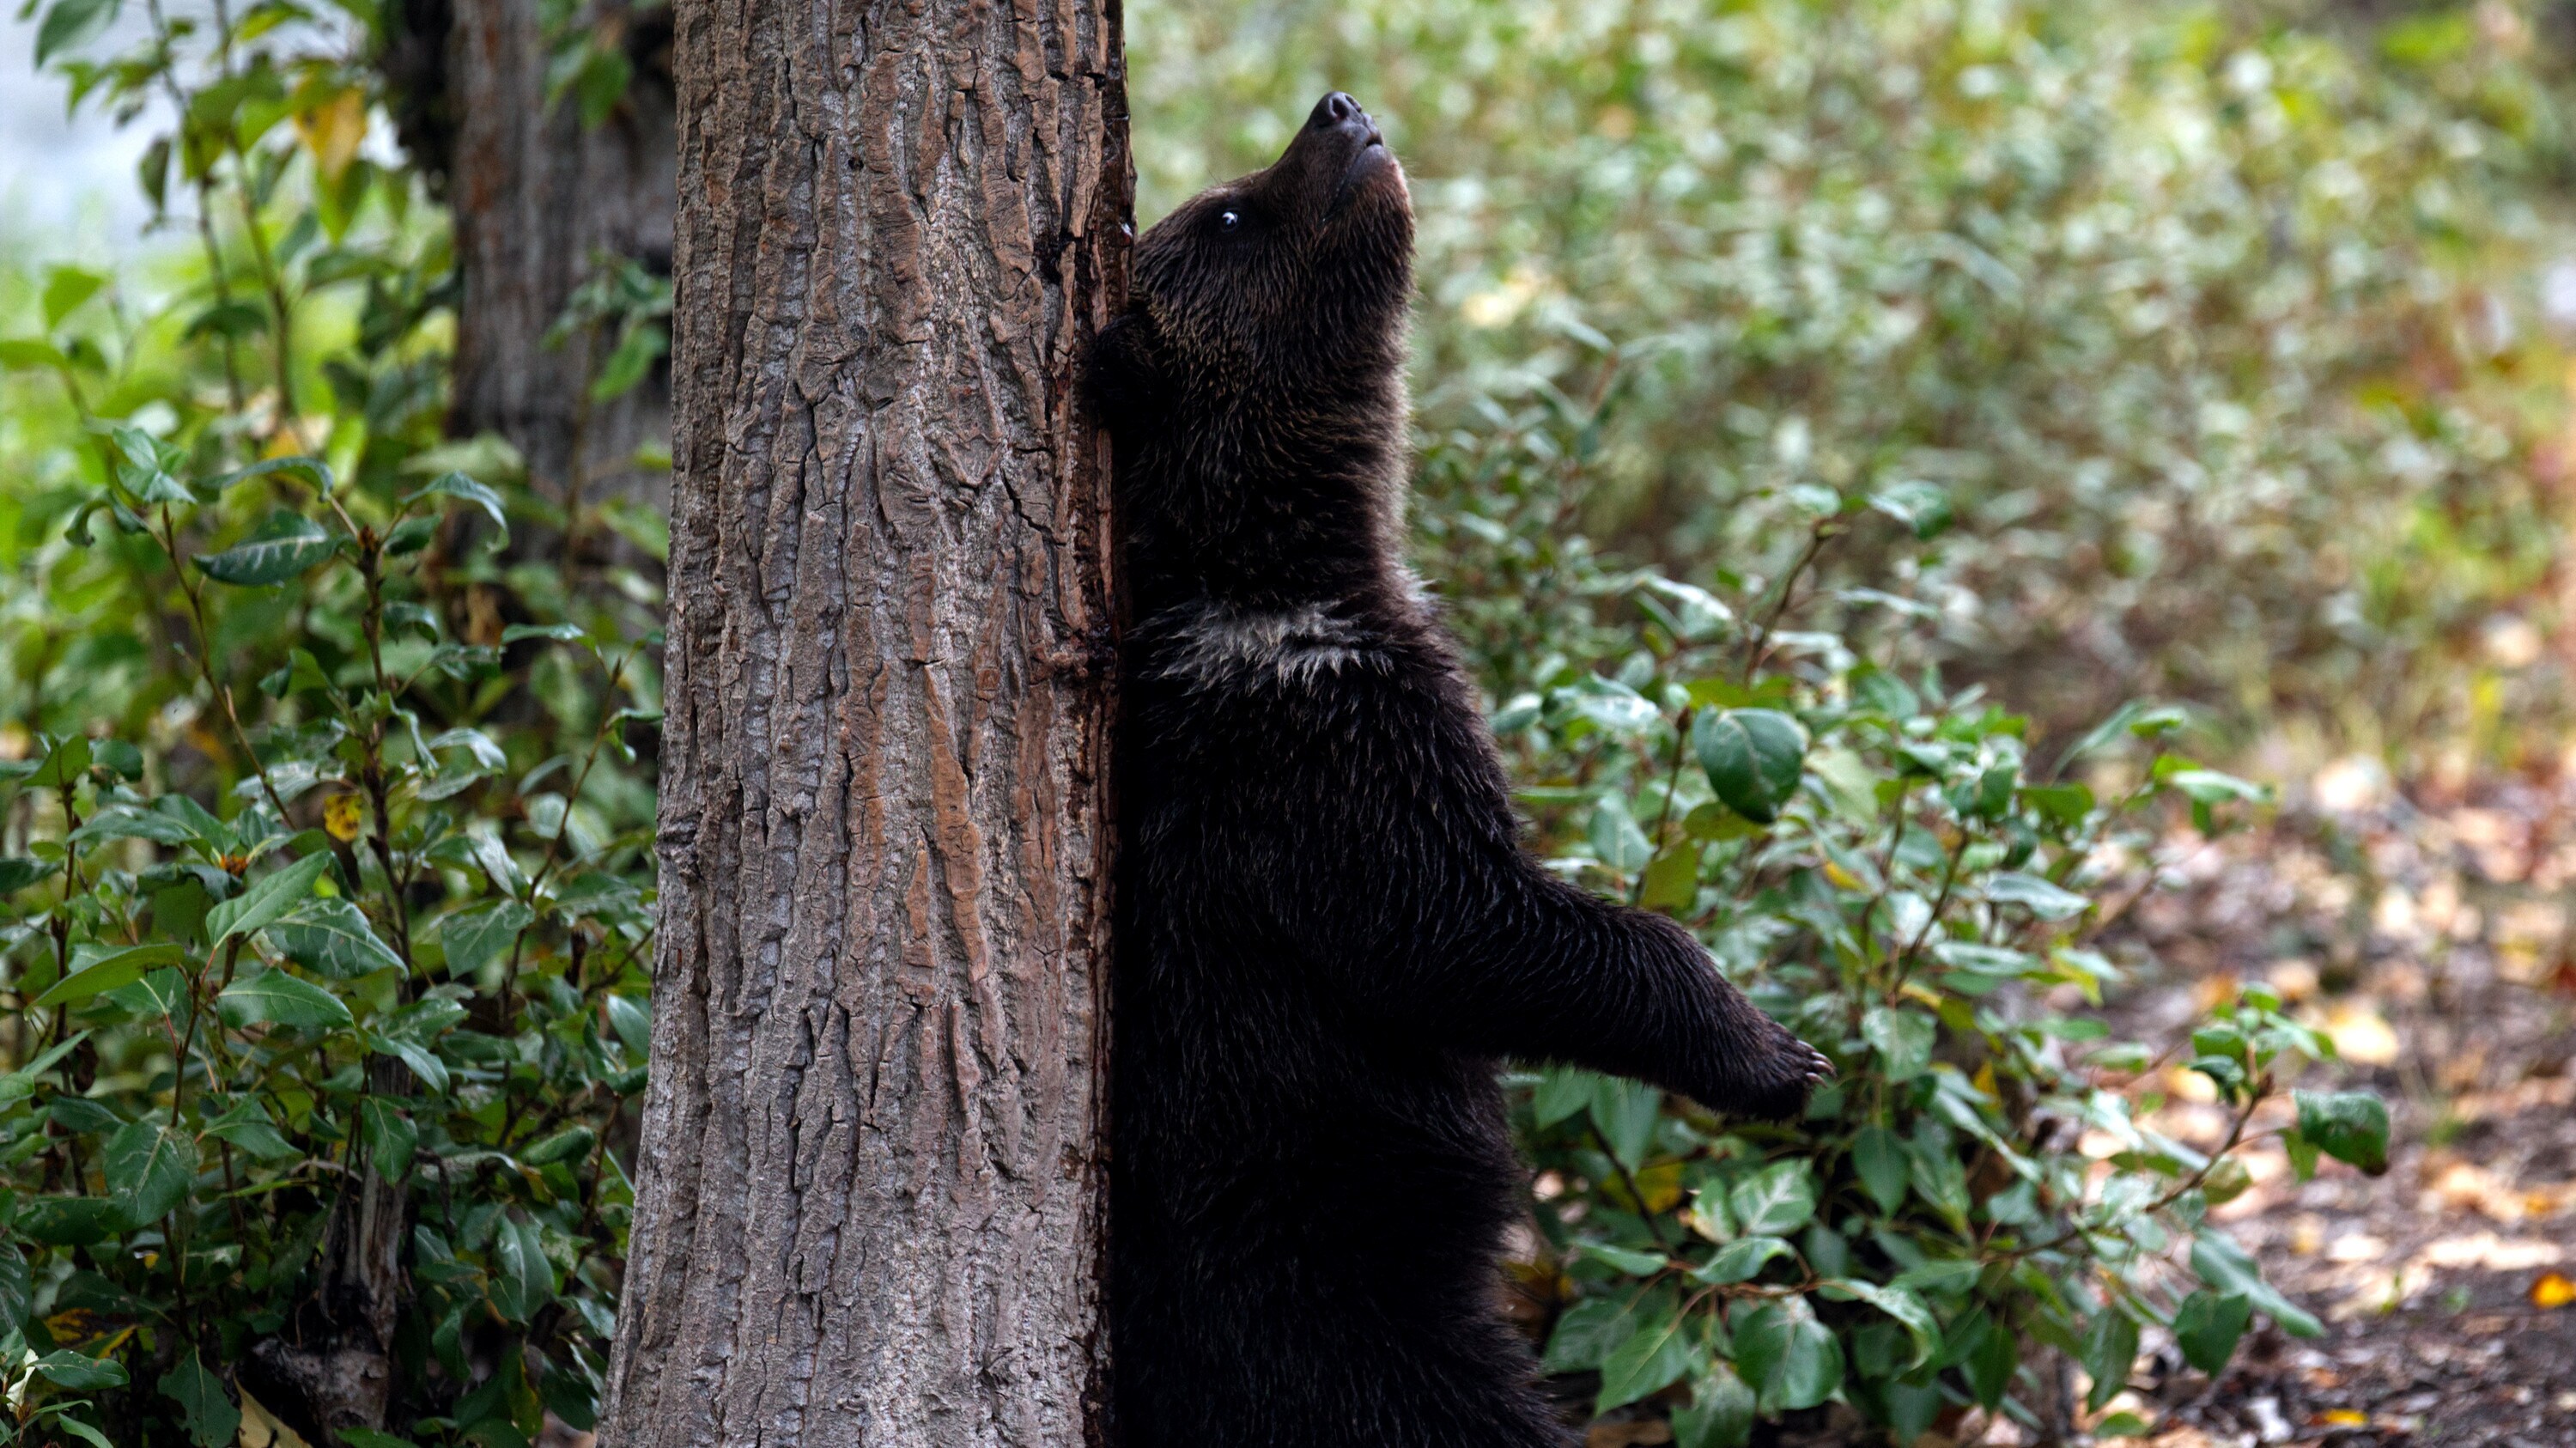 Bear cub standing and scratching his back on tree trunk. (National Geographic for Disney+/Samuel Ellis)